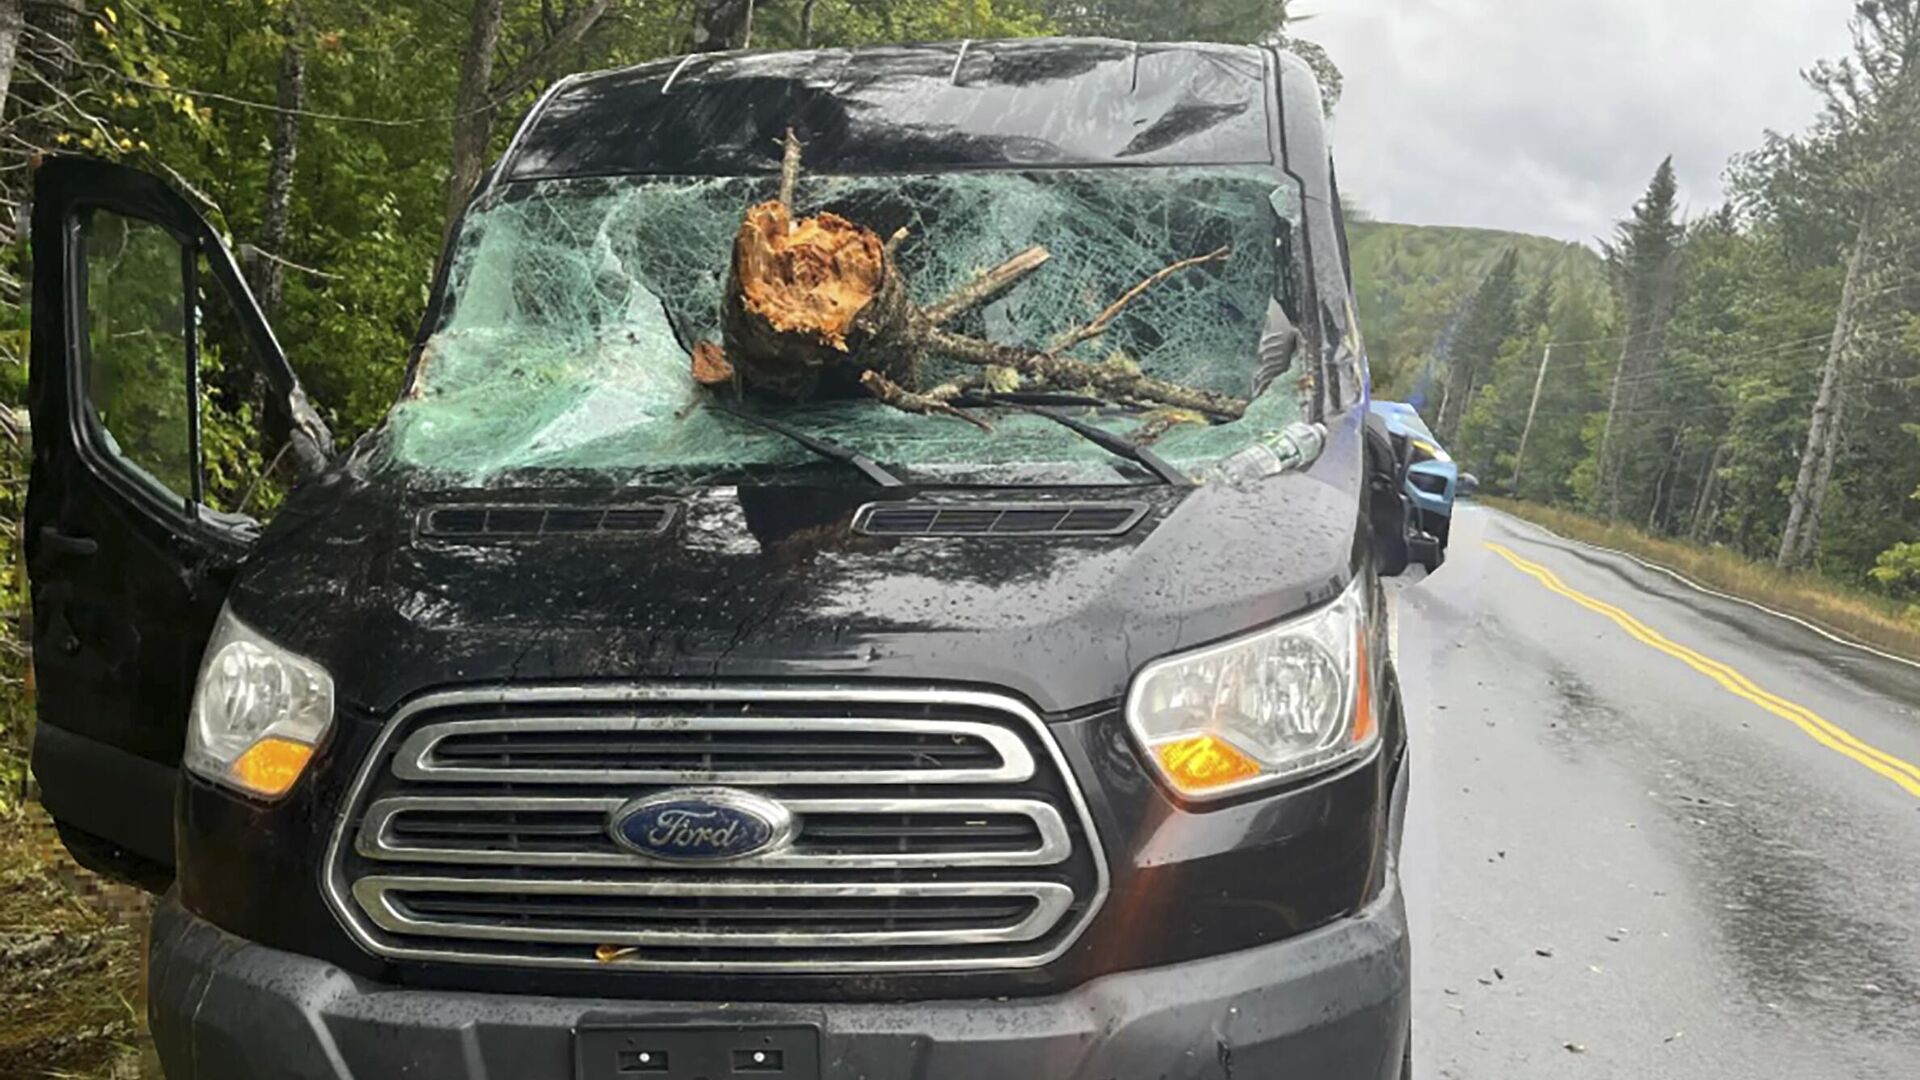 This image provided by Maine State Police shows the vehicle of an Ohio driver who suffered minor injuries Saturday, Sept. 16 2023 after tree downed by the remnants of tropical storm Lee went through his windshield on Route 11 in Moro Plantation, Maine, according to Maine State Police. John Yoder, 23, of Apple Creek, Ohio attempted to stop but couldn’t avoid the tree. Yoder suffered minor cuts but the other five passengers in the van were not injured. Police blamed high winds for the downed tree.  - Sputnik International, 1920, 18.09.2023